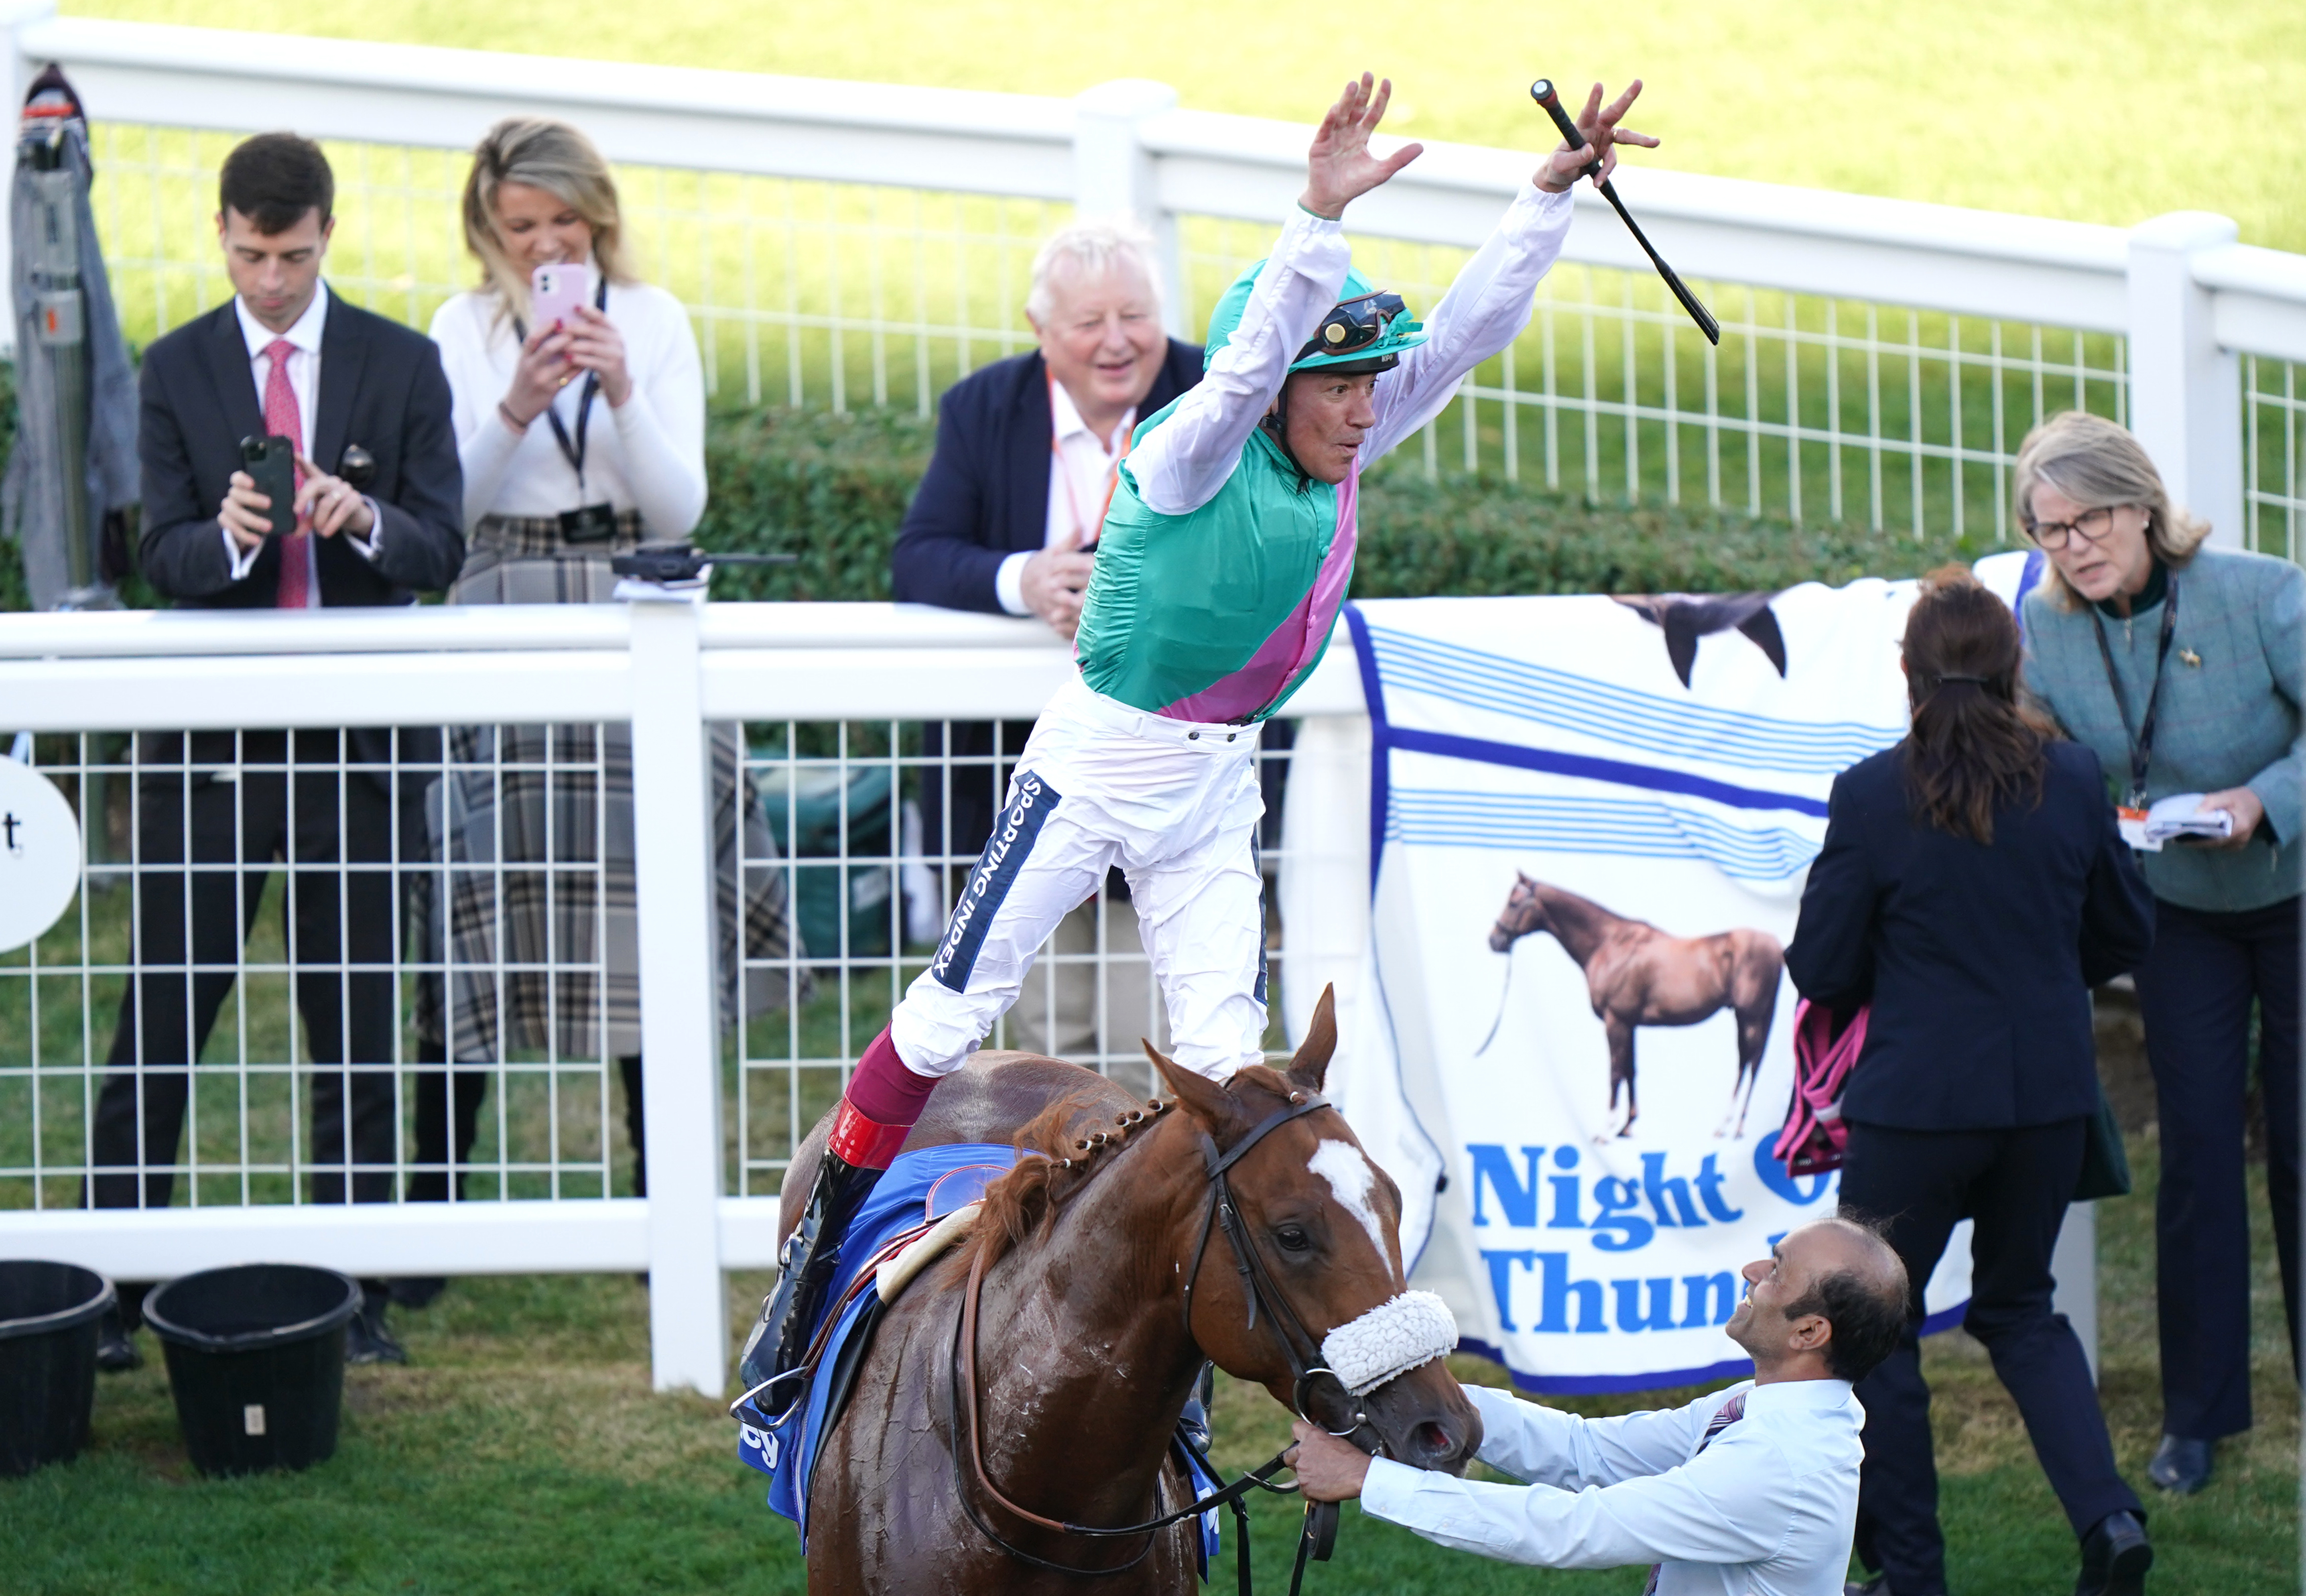 Frankie Dettori performs a flying dismount after winning the Darley Dewhurst Stakes on Chaldean at Newmarket